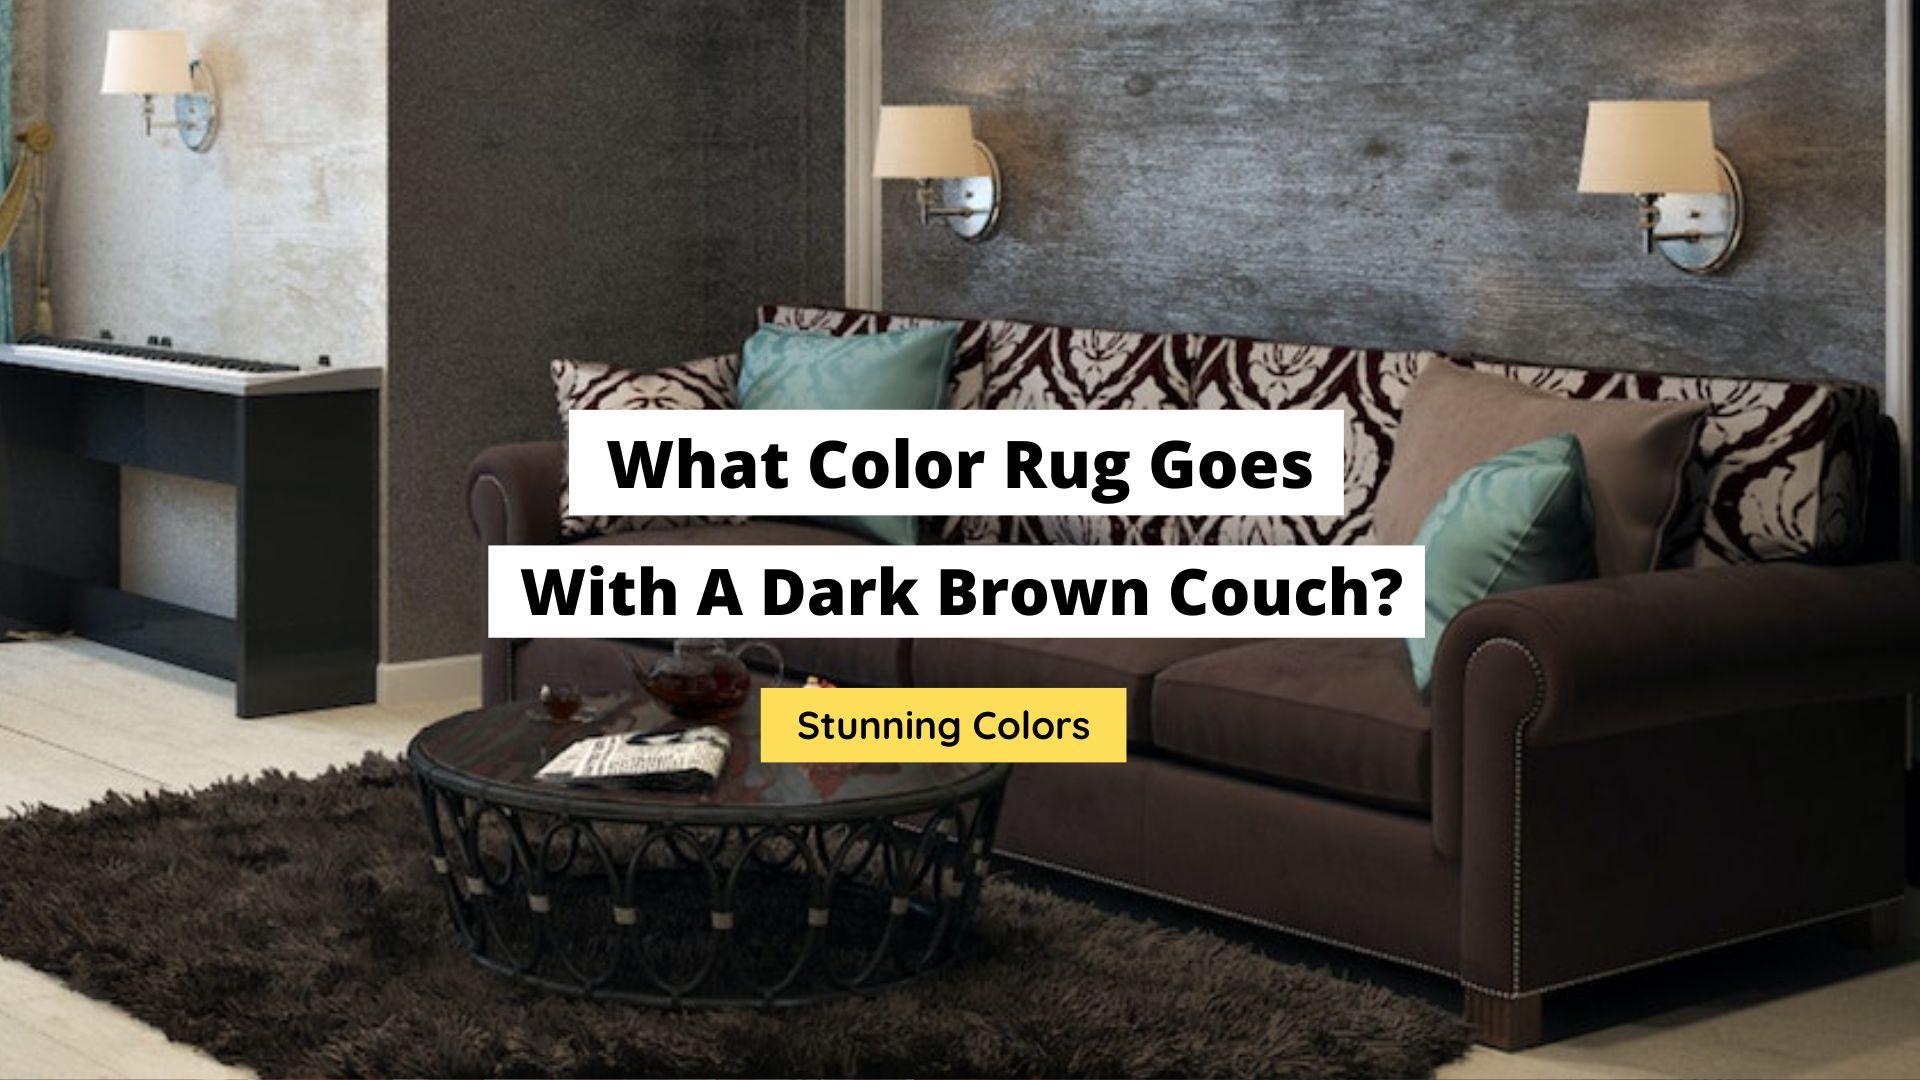 What Color Rug Goes With A Dark Brown Couch